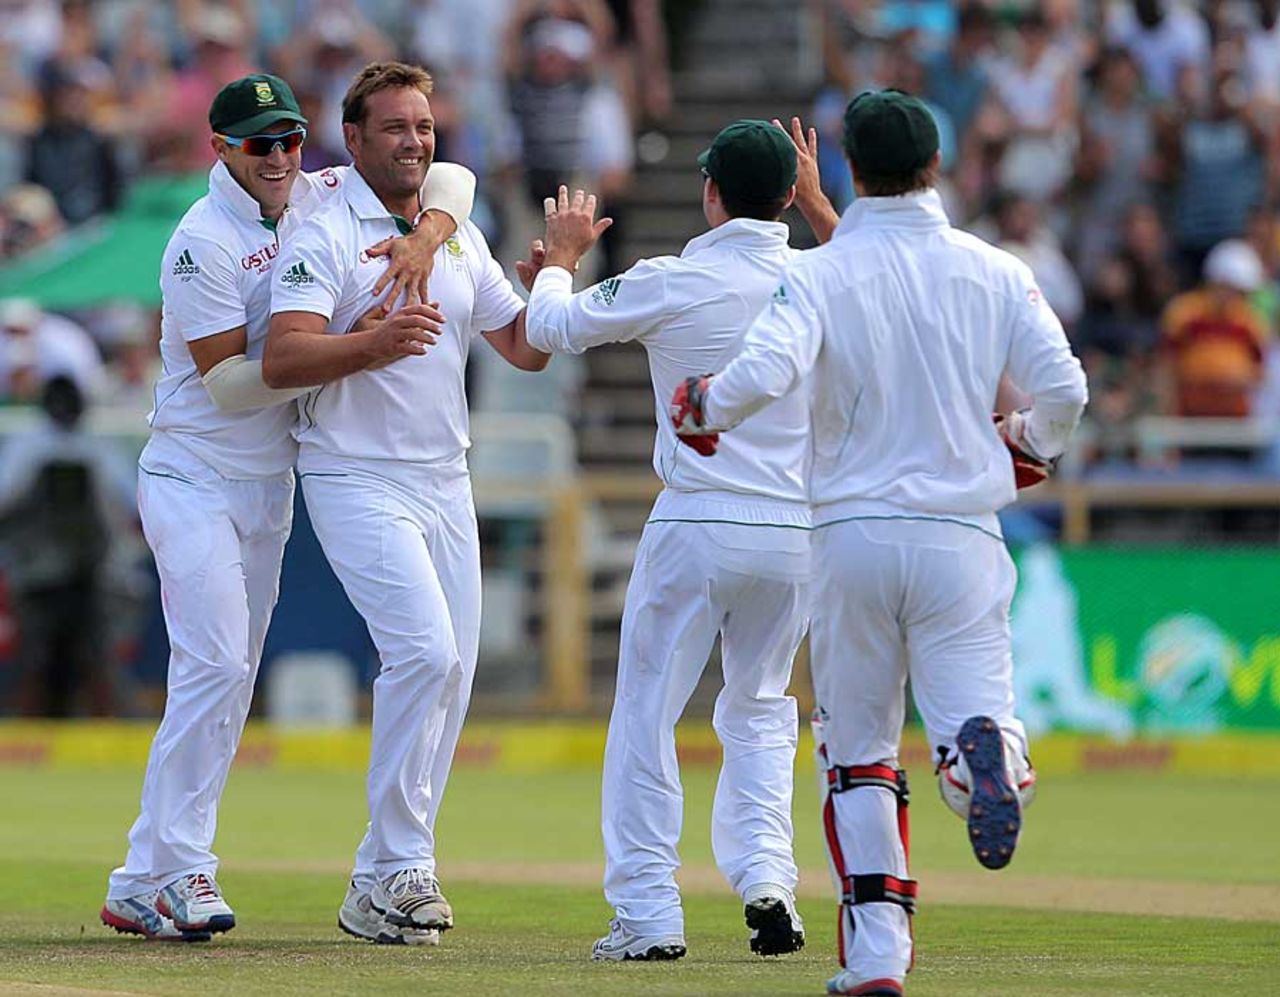 Jacques Kallis got rid of Kane Williamson, South Africa v New Zealand, 1st Test, Cape Town, 2nd day, January 3, 2013